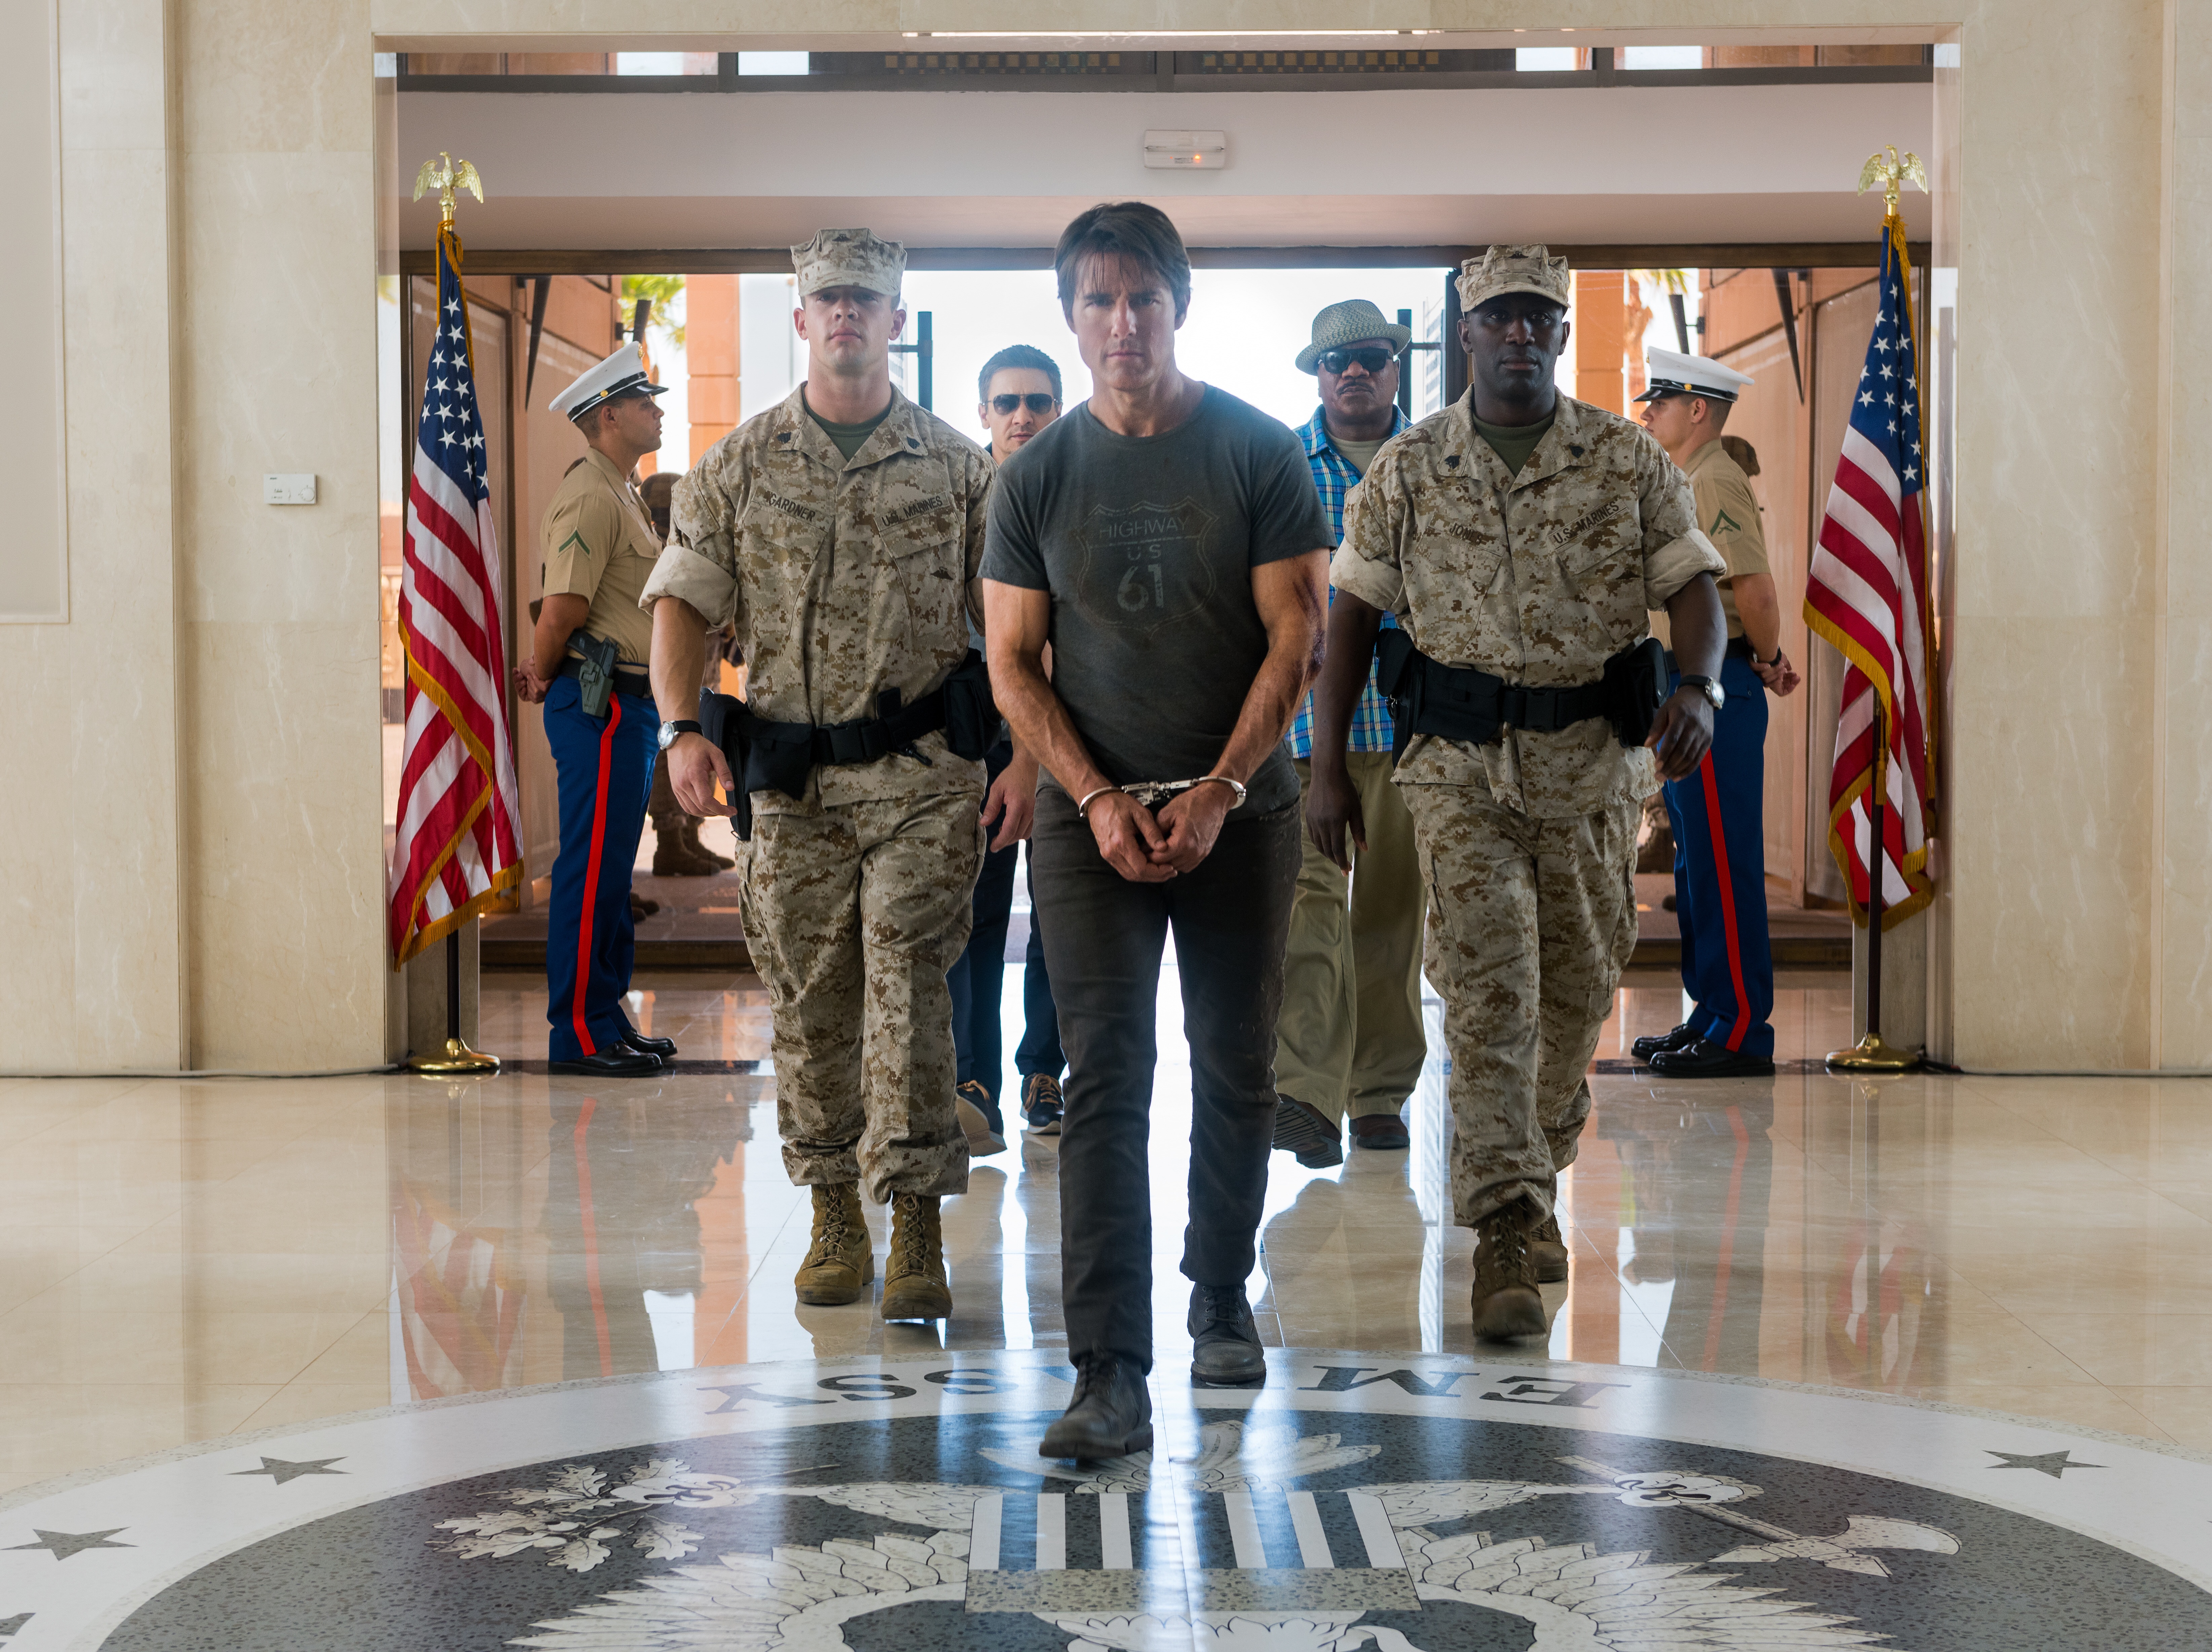 Tom Cruise, Ving Rhames, Jeremy Renner, Vauxhall Jermaine in a scene from Mission: Impossible Rogue Nation